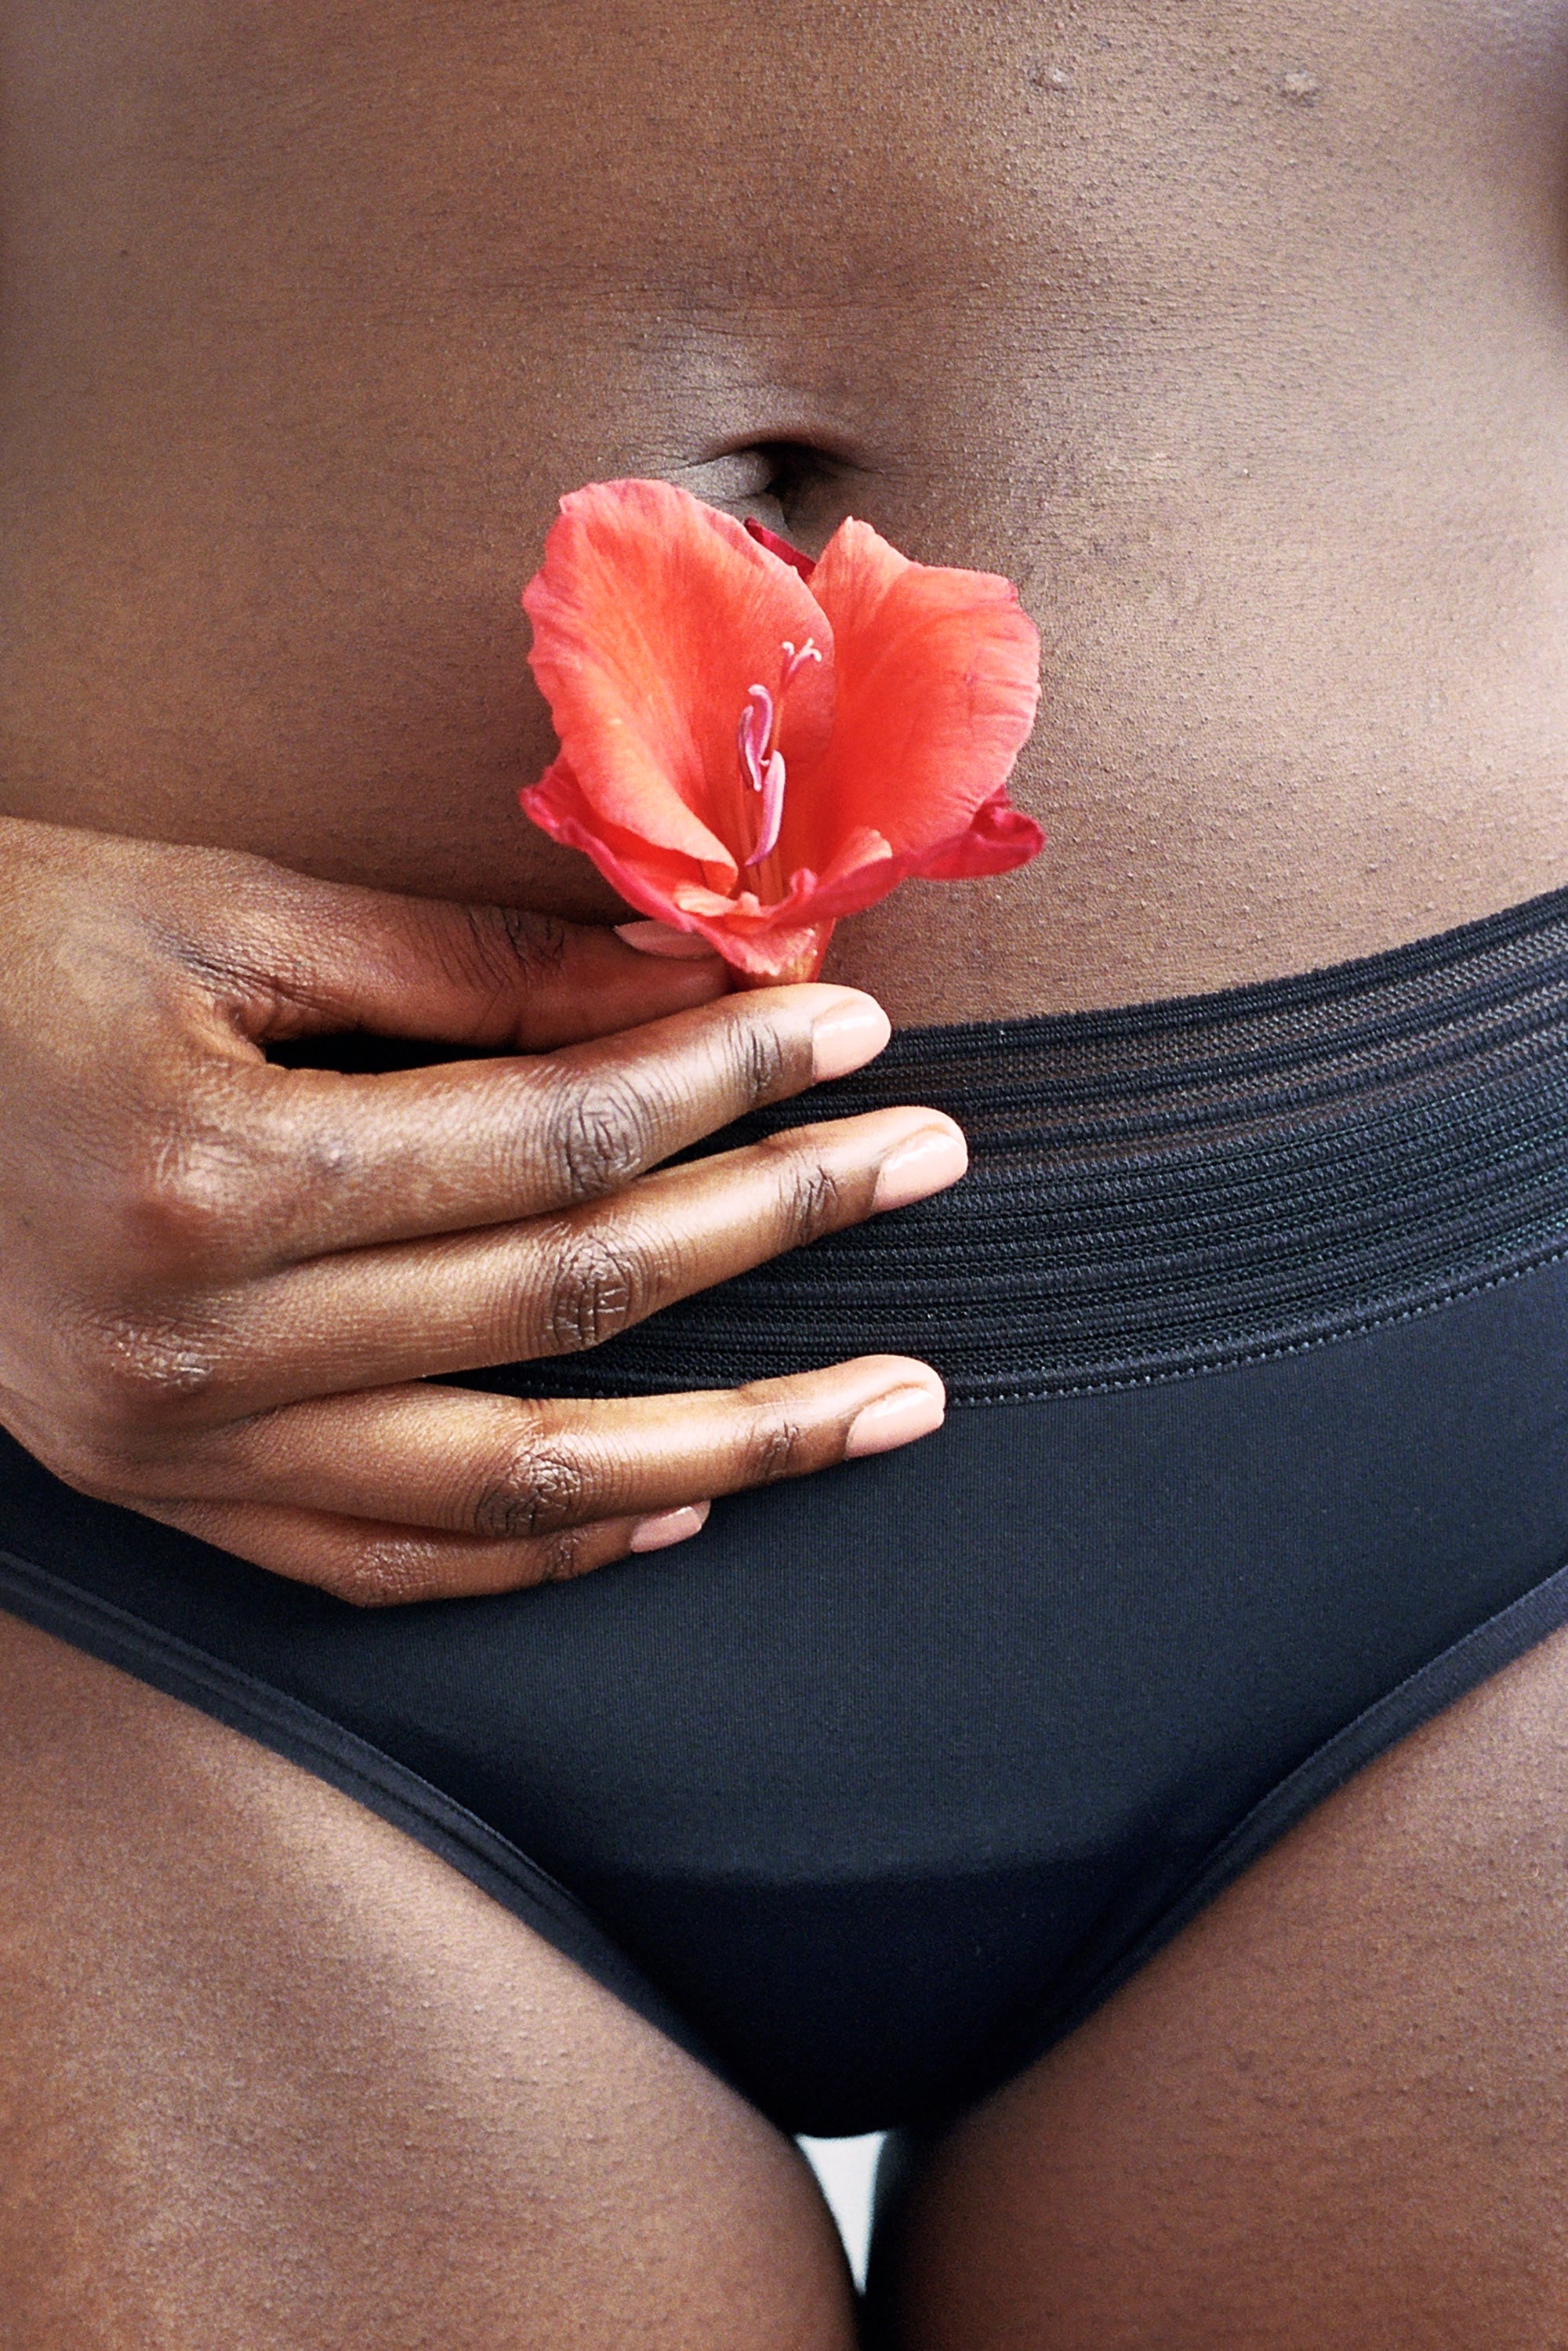 We Need To Talk About Black Women's Struggle With PMDD